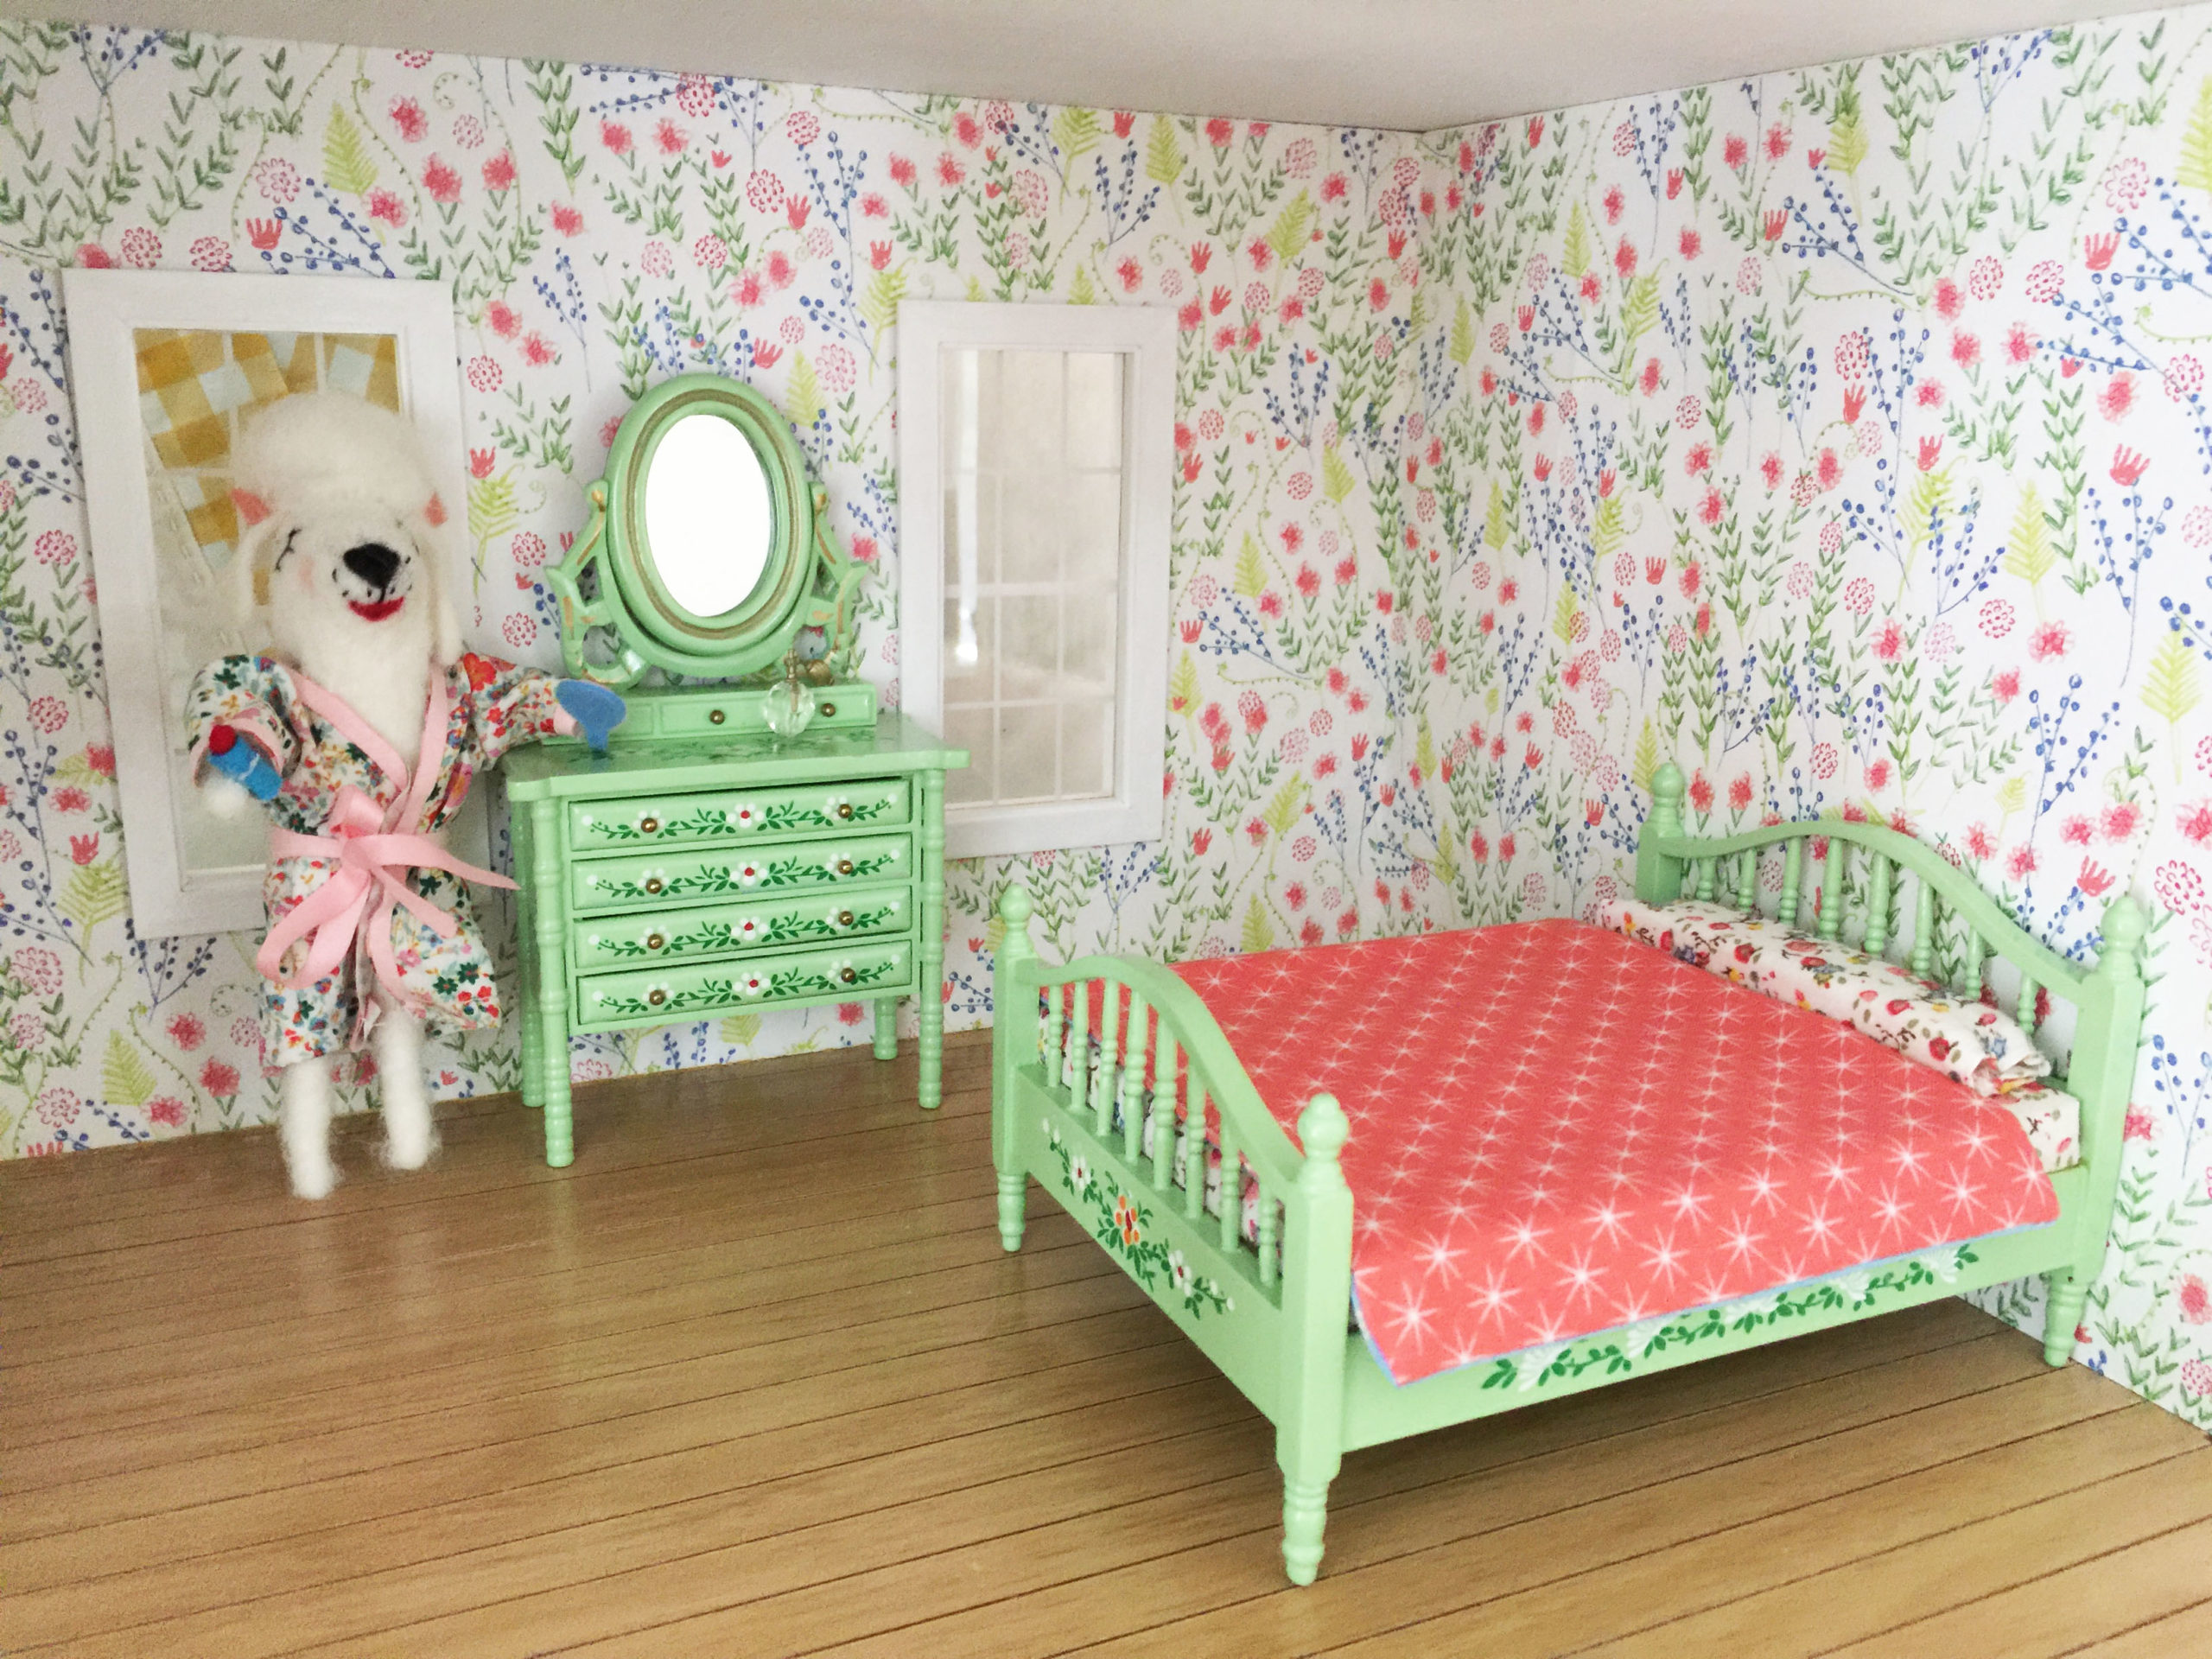 patch-and-dot-dollhouse-4